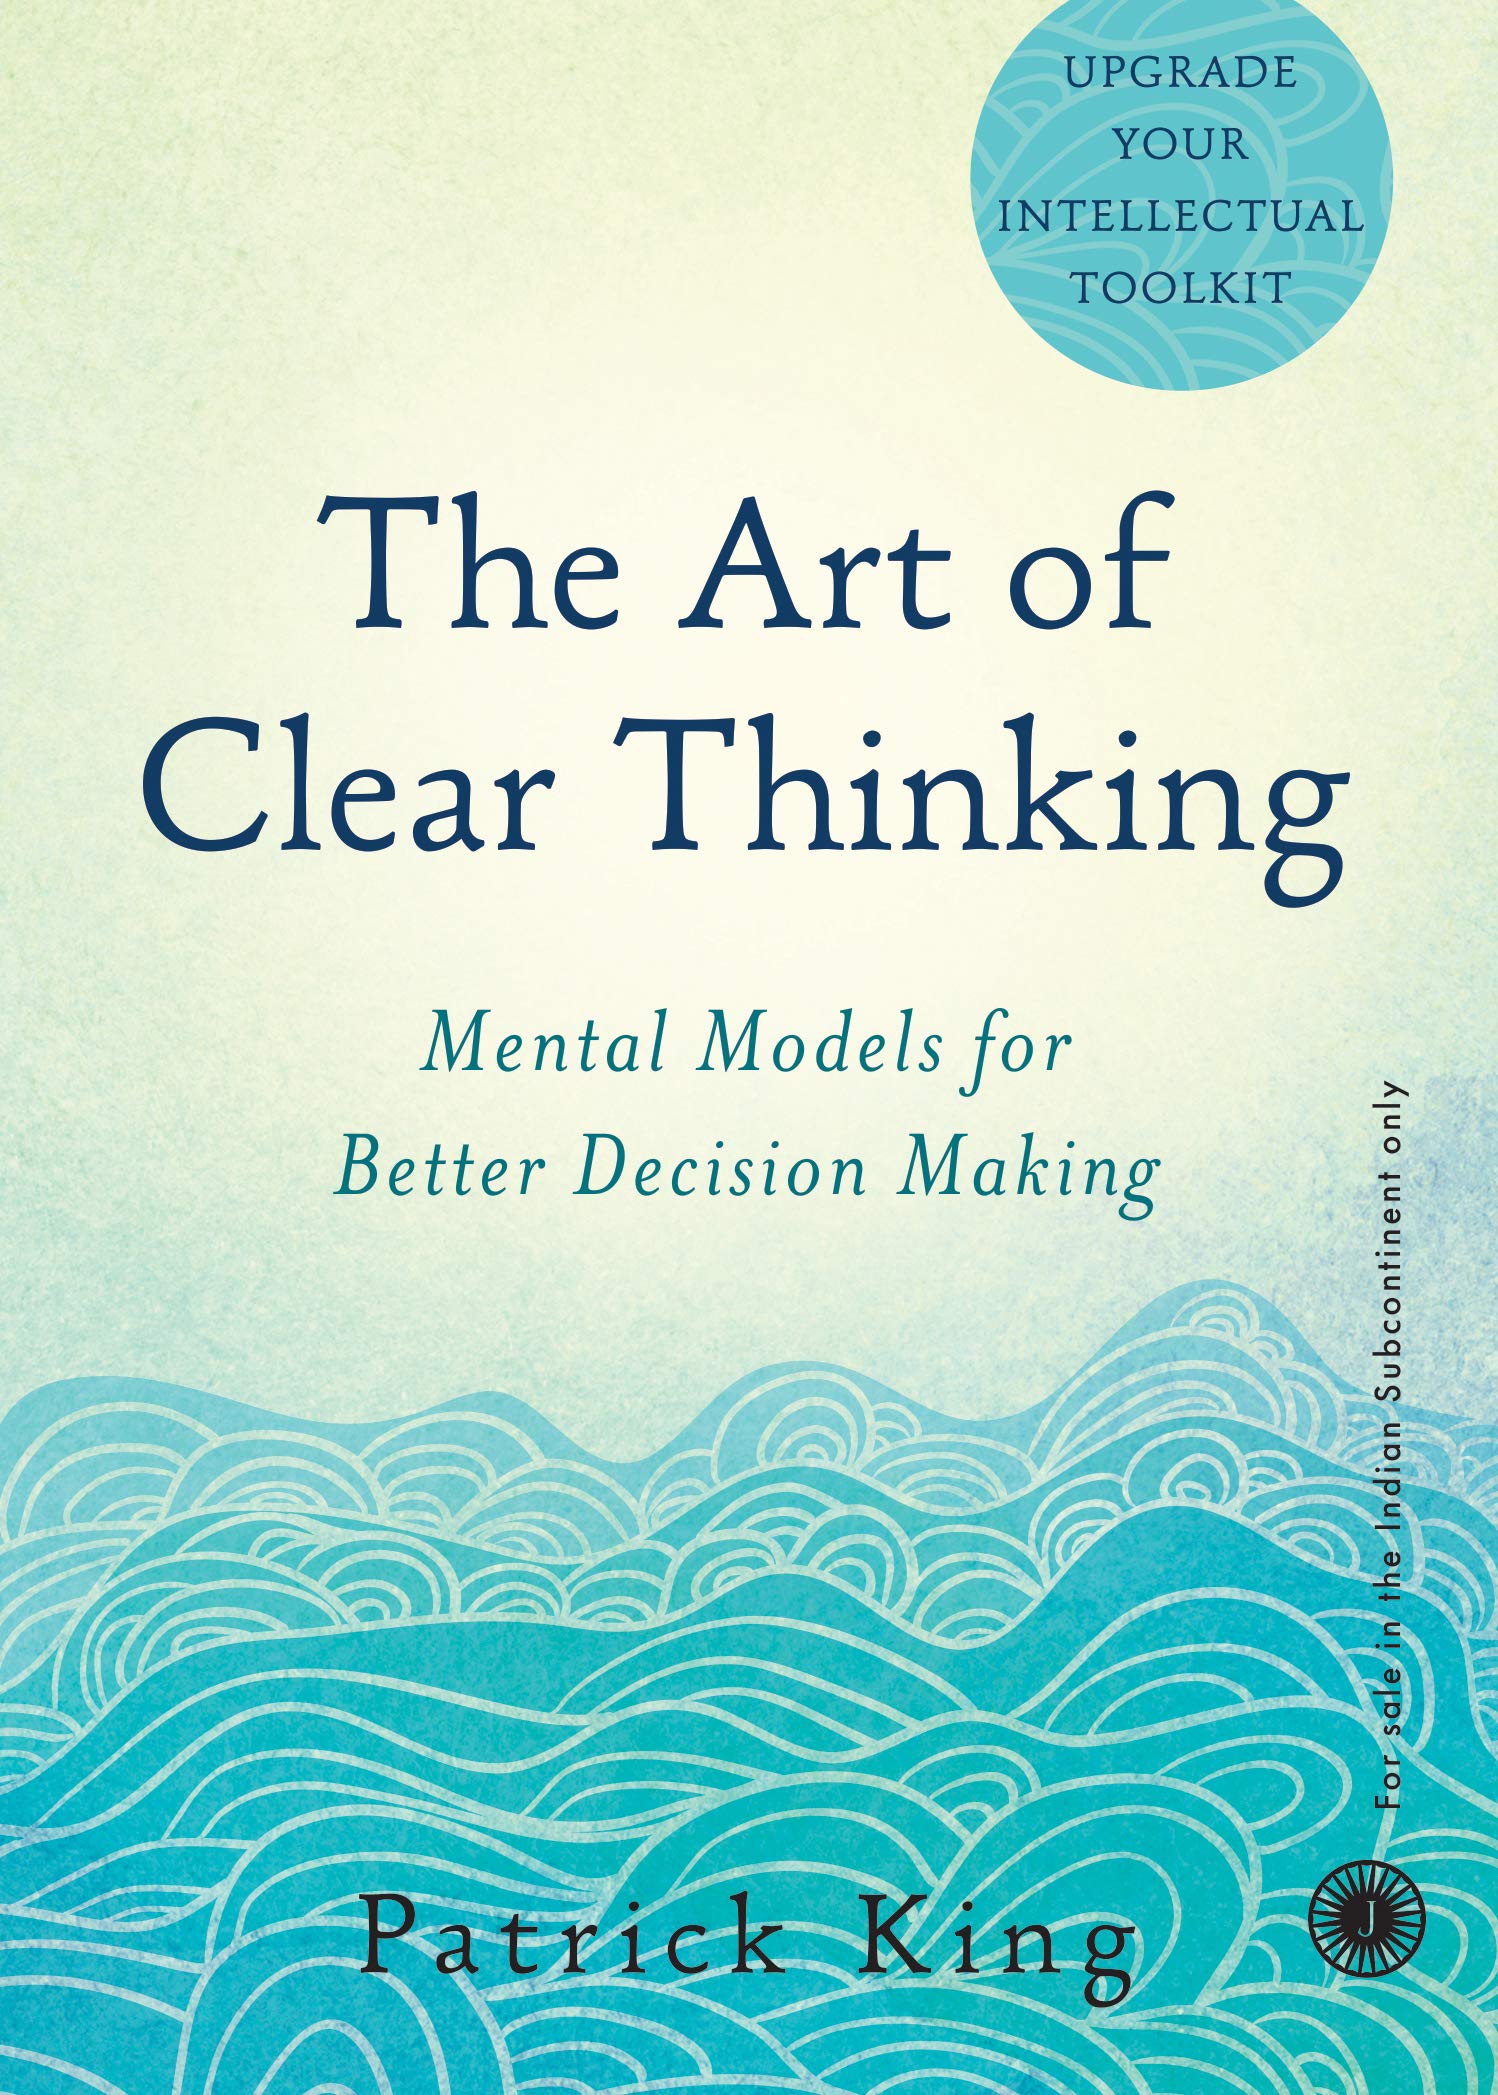 The Art of Clear Thinking (Mental Models for Better Decision Making)